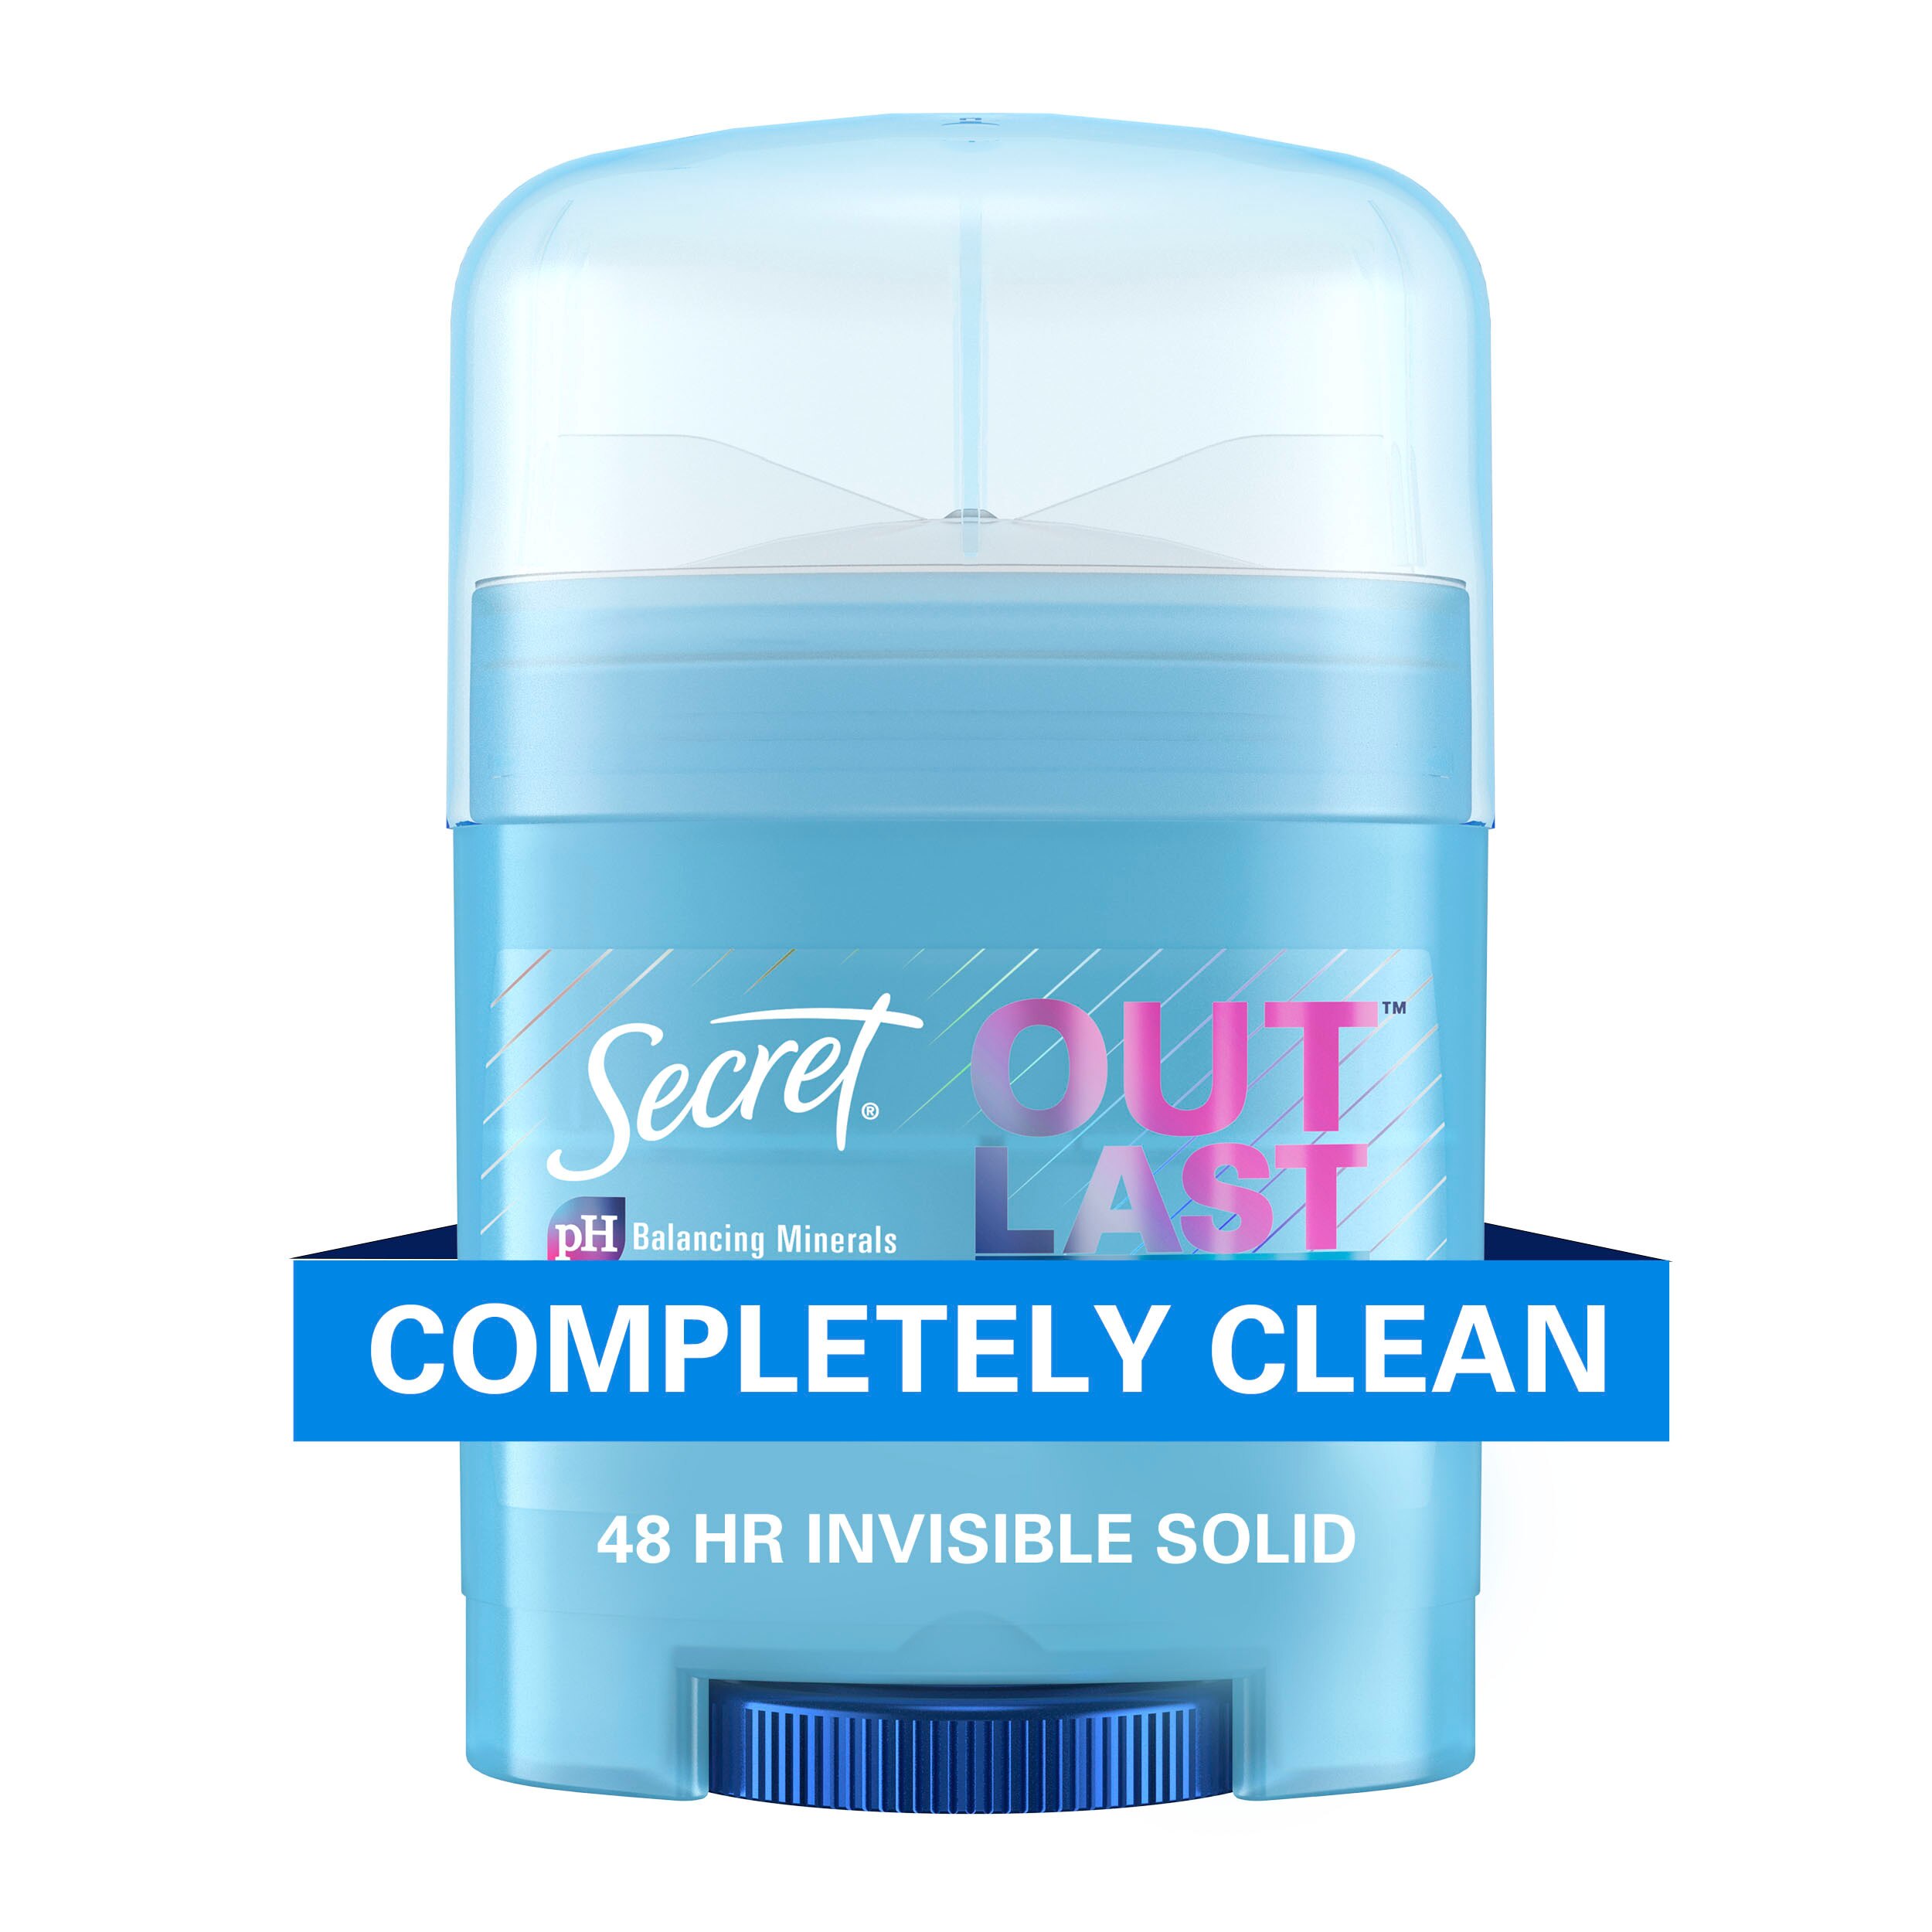 Secret Outlast Xtend Invisible Solid Completely Clean Antiperspirant/Deodorant, 0.5 OZ